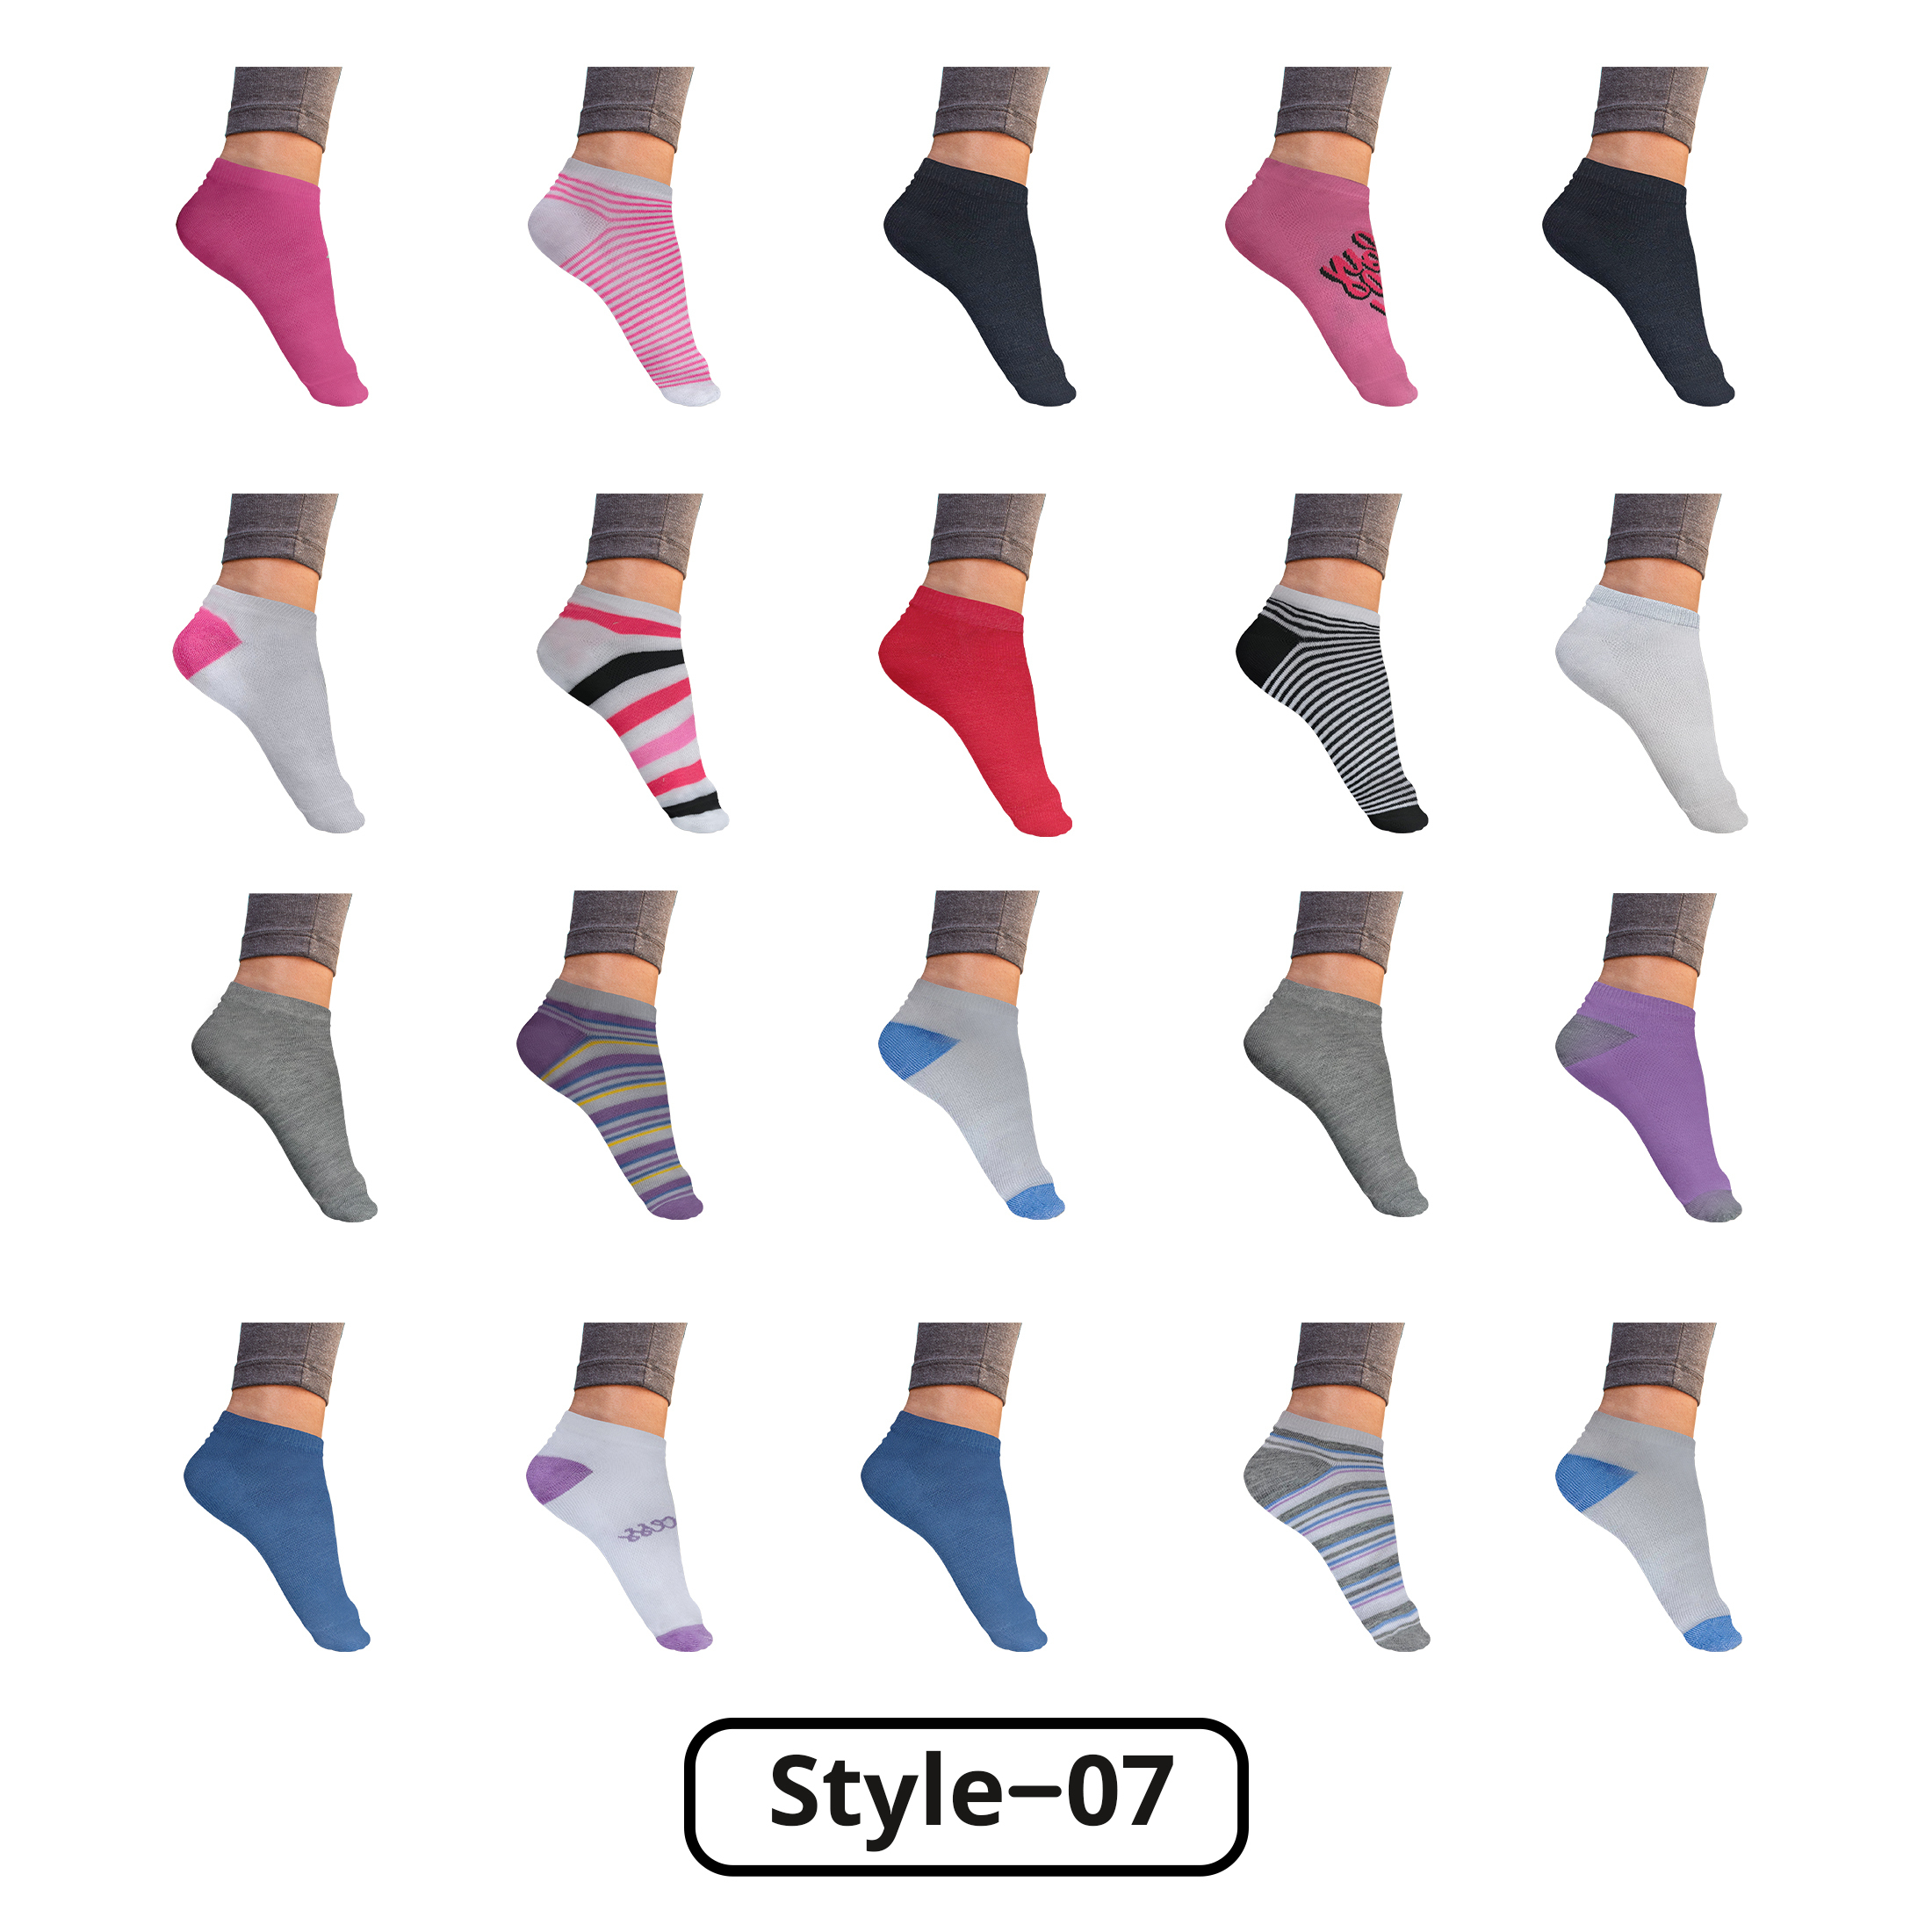 20-Pairs: Women’s Breathable Stylish Colorful Fun No Show Low Cut Ankle Socks - Style 7